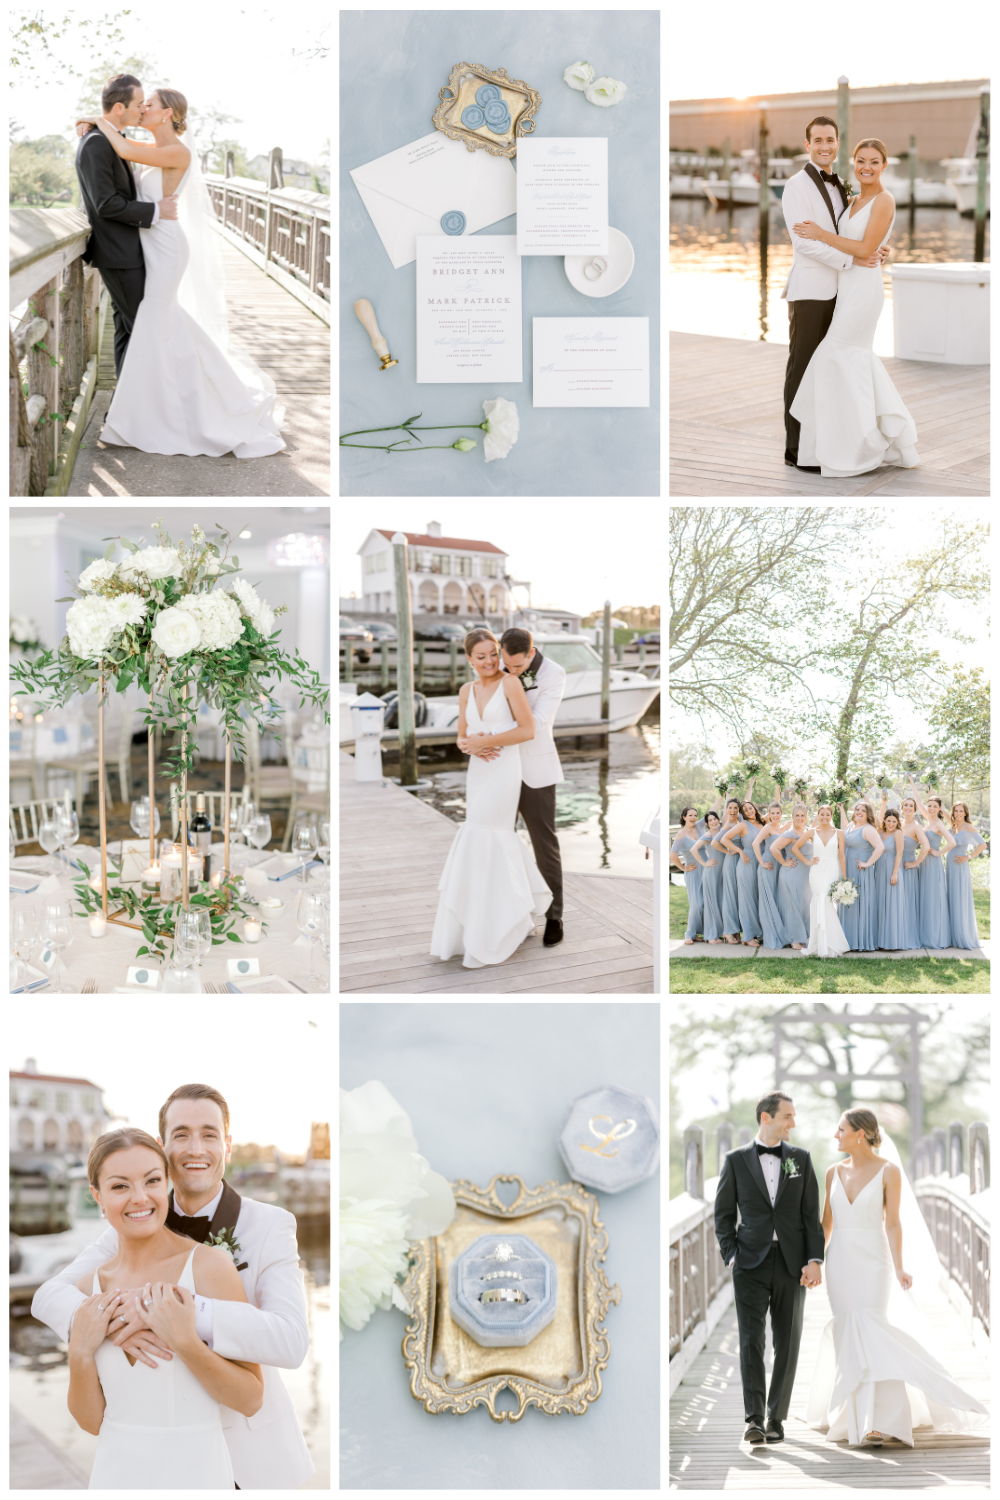 Coastal inspired Crystal Point Yacht Club Wedding with dusty blue details photographed by NJ wedding photographer Susan Elizabeth Weddings